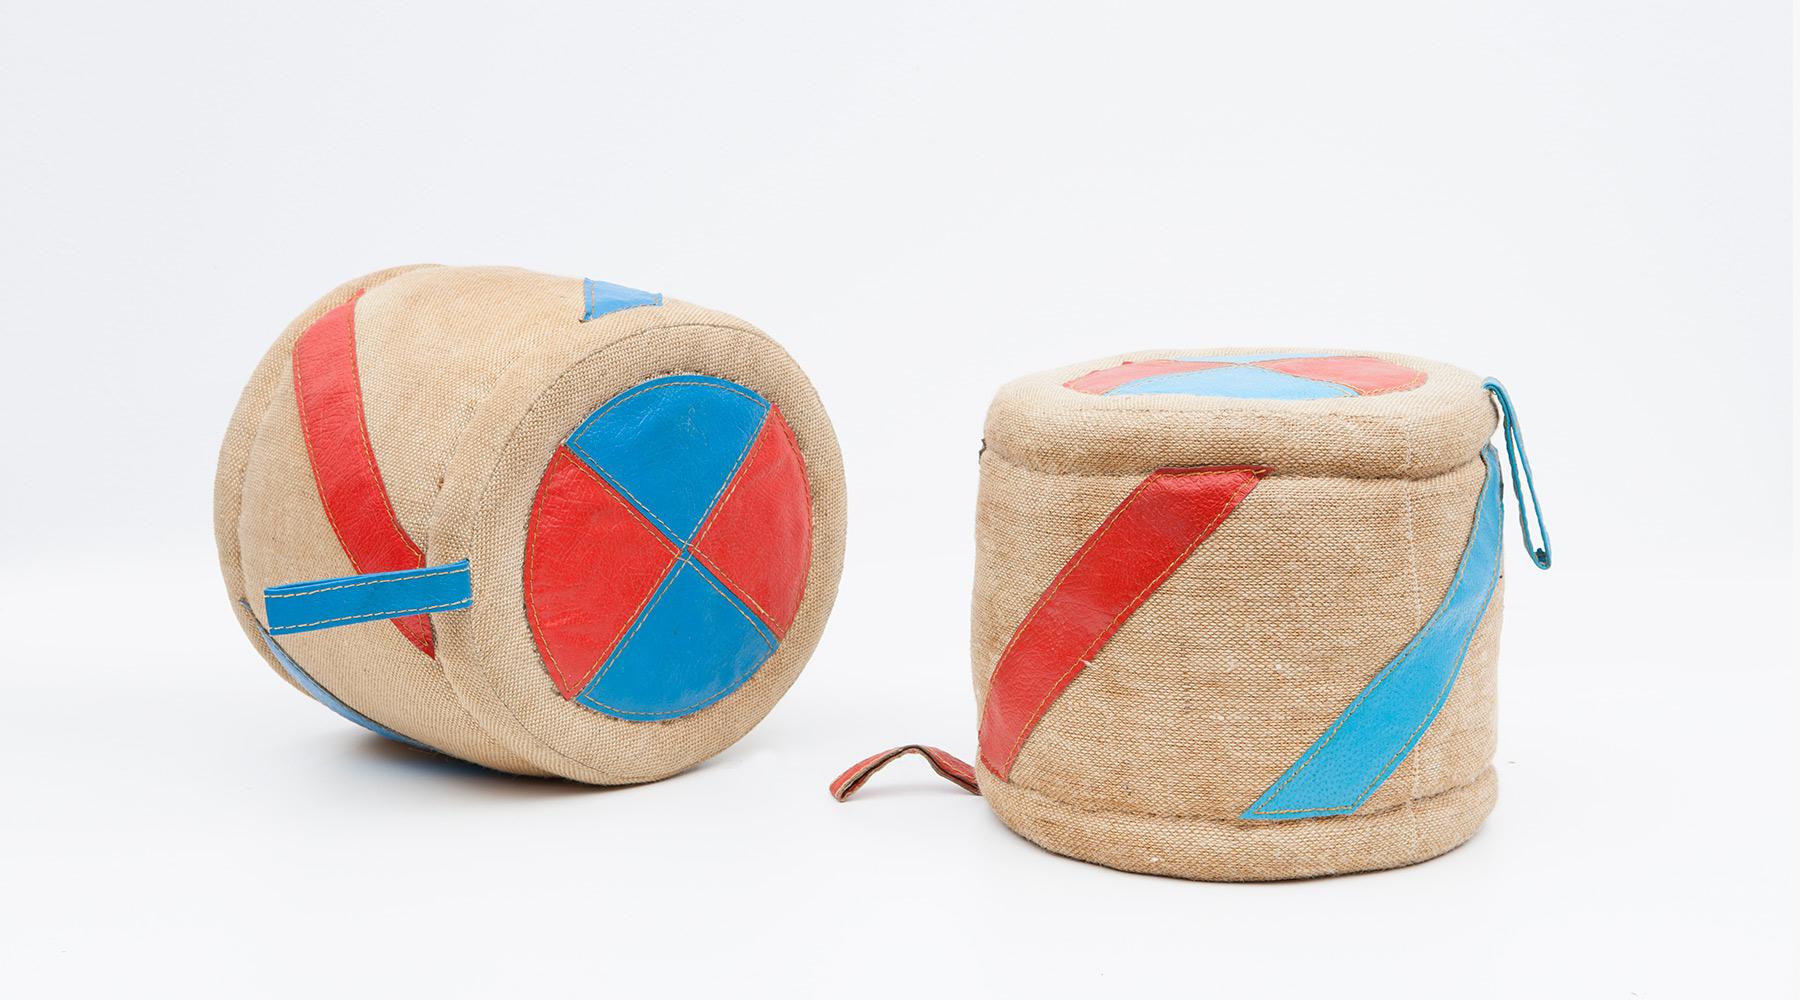 Two rolls, children toy in jute and leather by Renate Müller, Germany, 1972.

Authentic children toy from the 1970s by Renate Müller. Unique in shape and workmanship. This example shows two rolls in a shape of drums and made of jute and leather